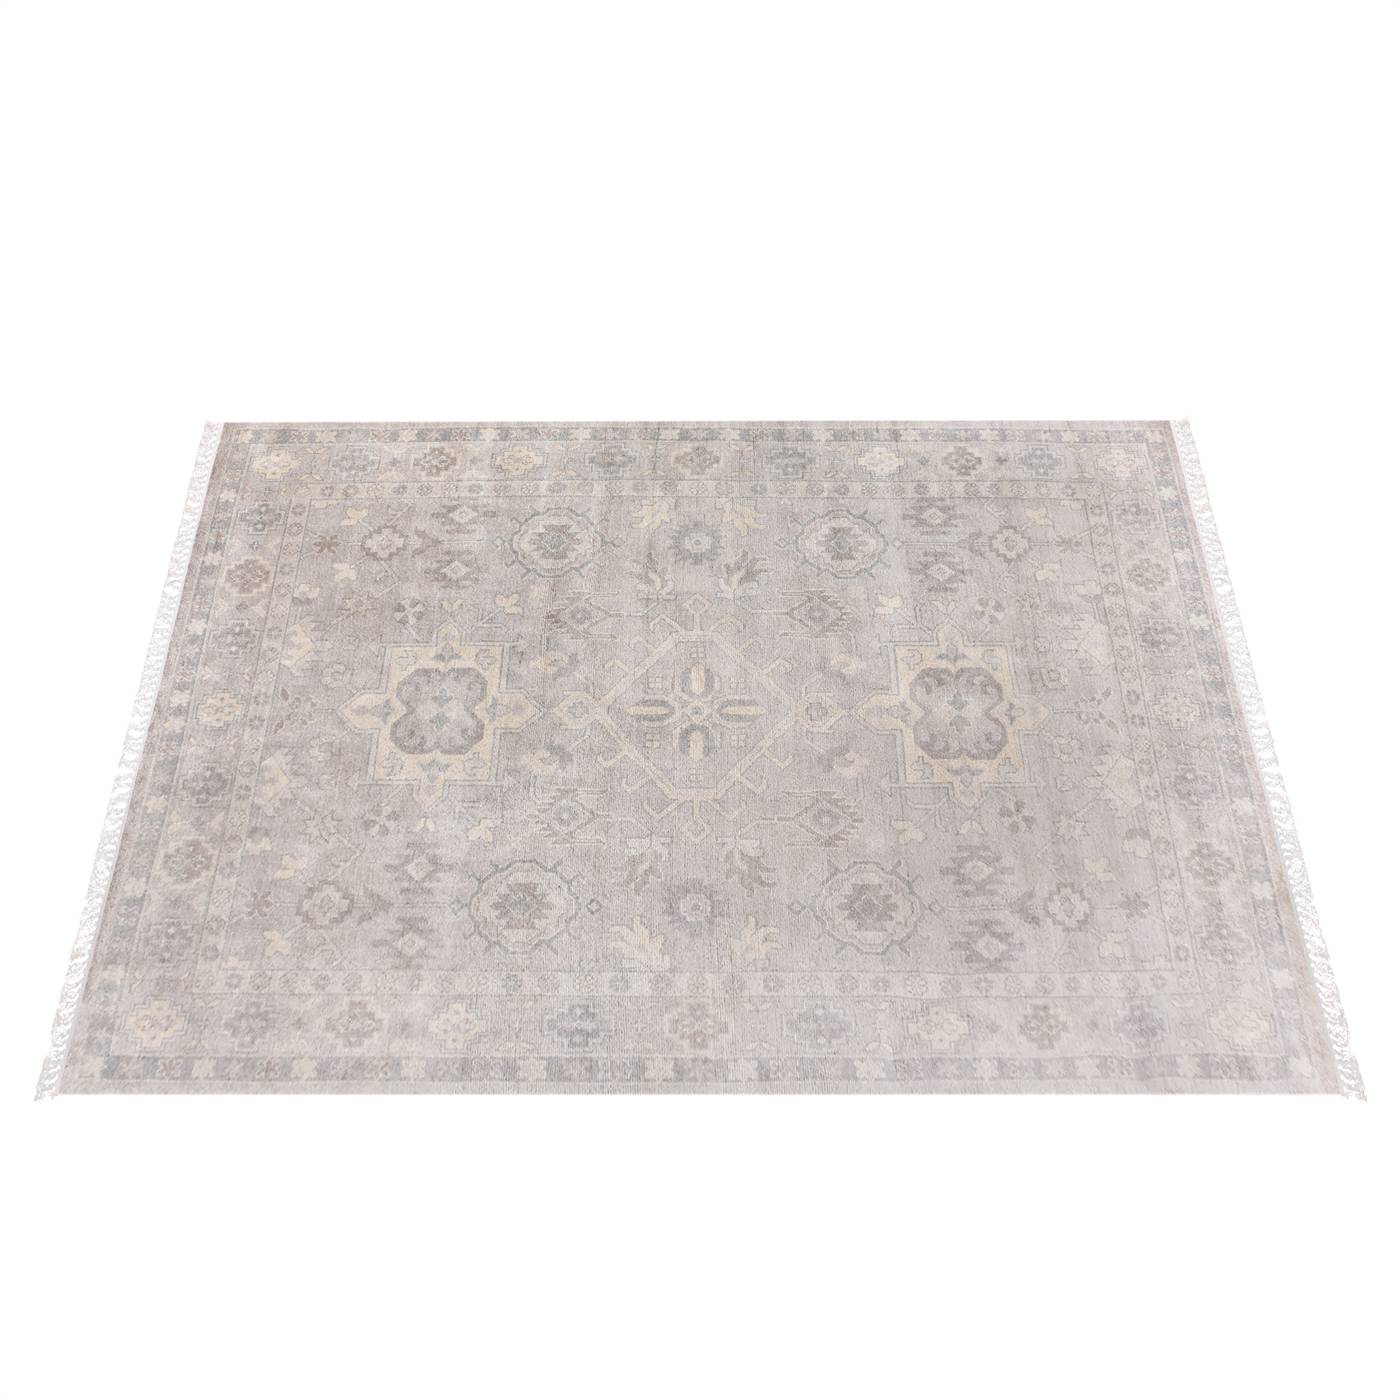 Area Rug, Bedroom Rug, Living Room Rug, Living Area Rug, Indian Rug, Office Carpet, Office Rug, Shop Rug Online, Grey, Wool, Hand Knotted , Handknotted, All Cut, Intricate 